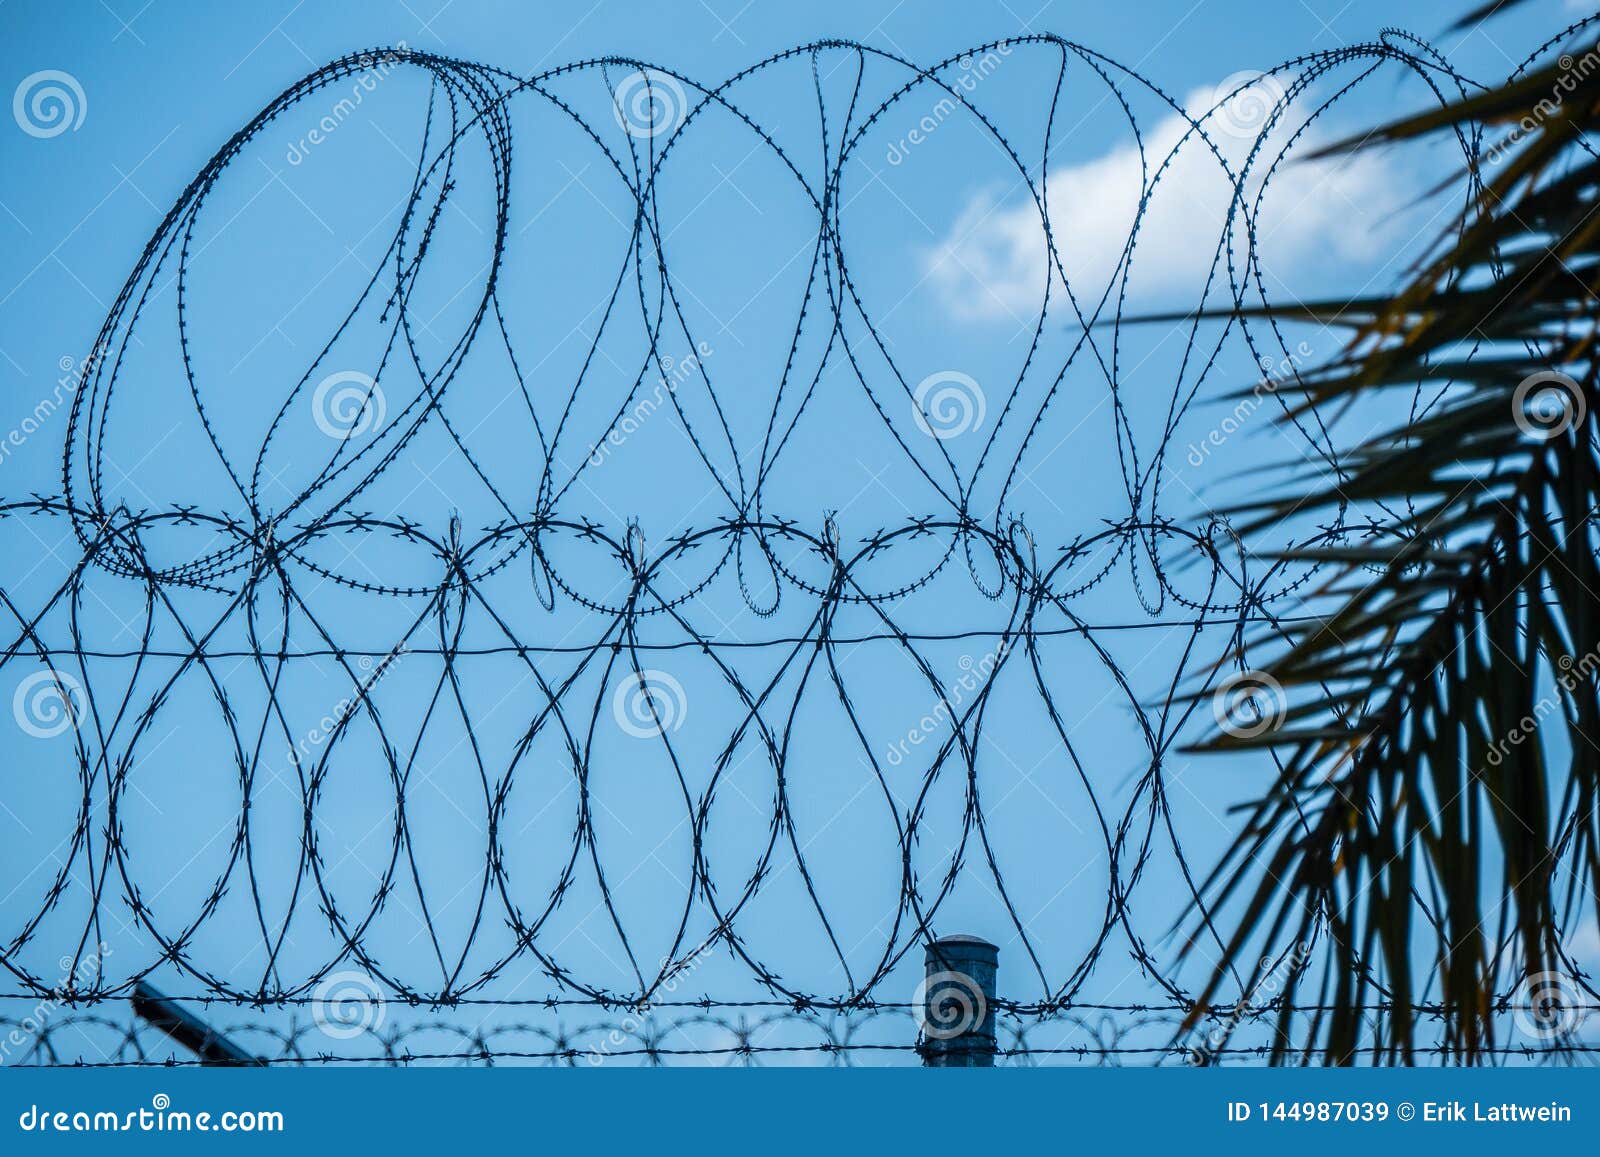 Barbwire Fence at the Mexican Border Stock Image - Image of blue, brick ...